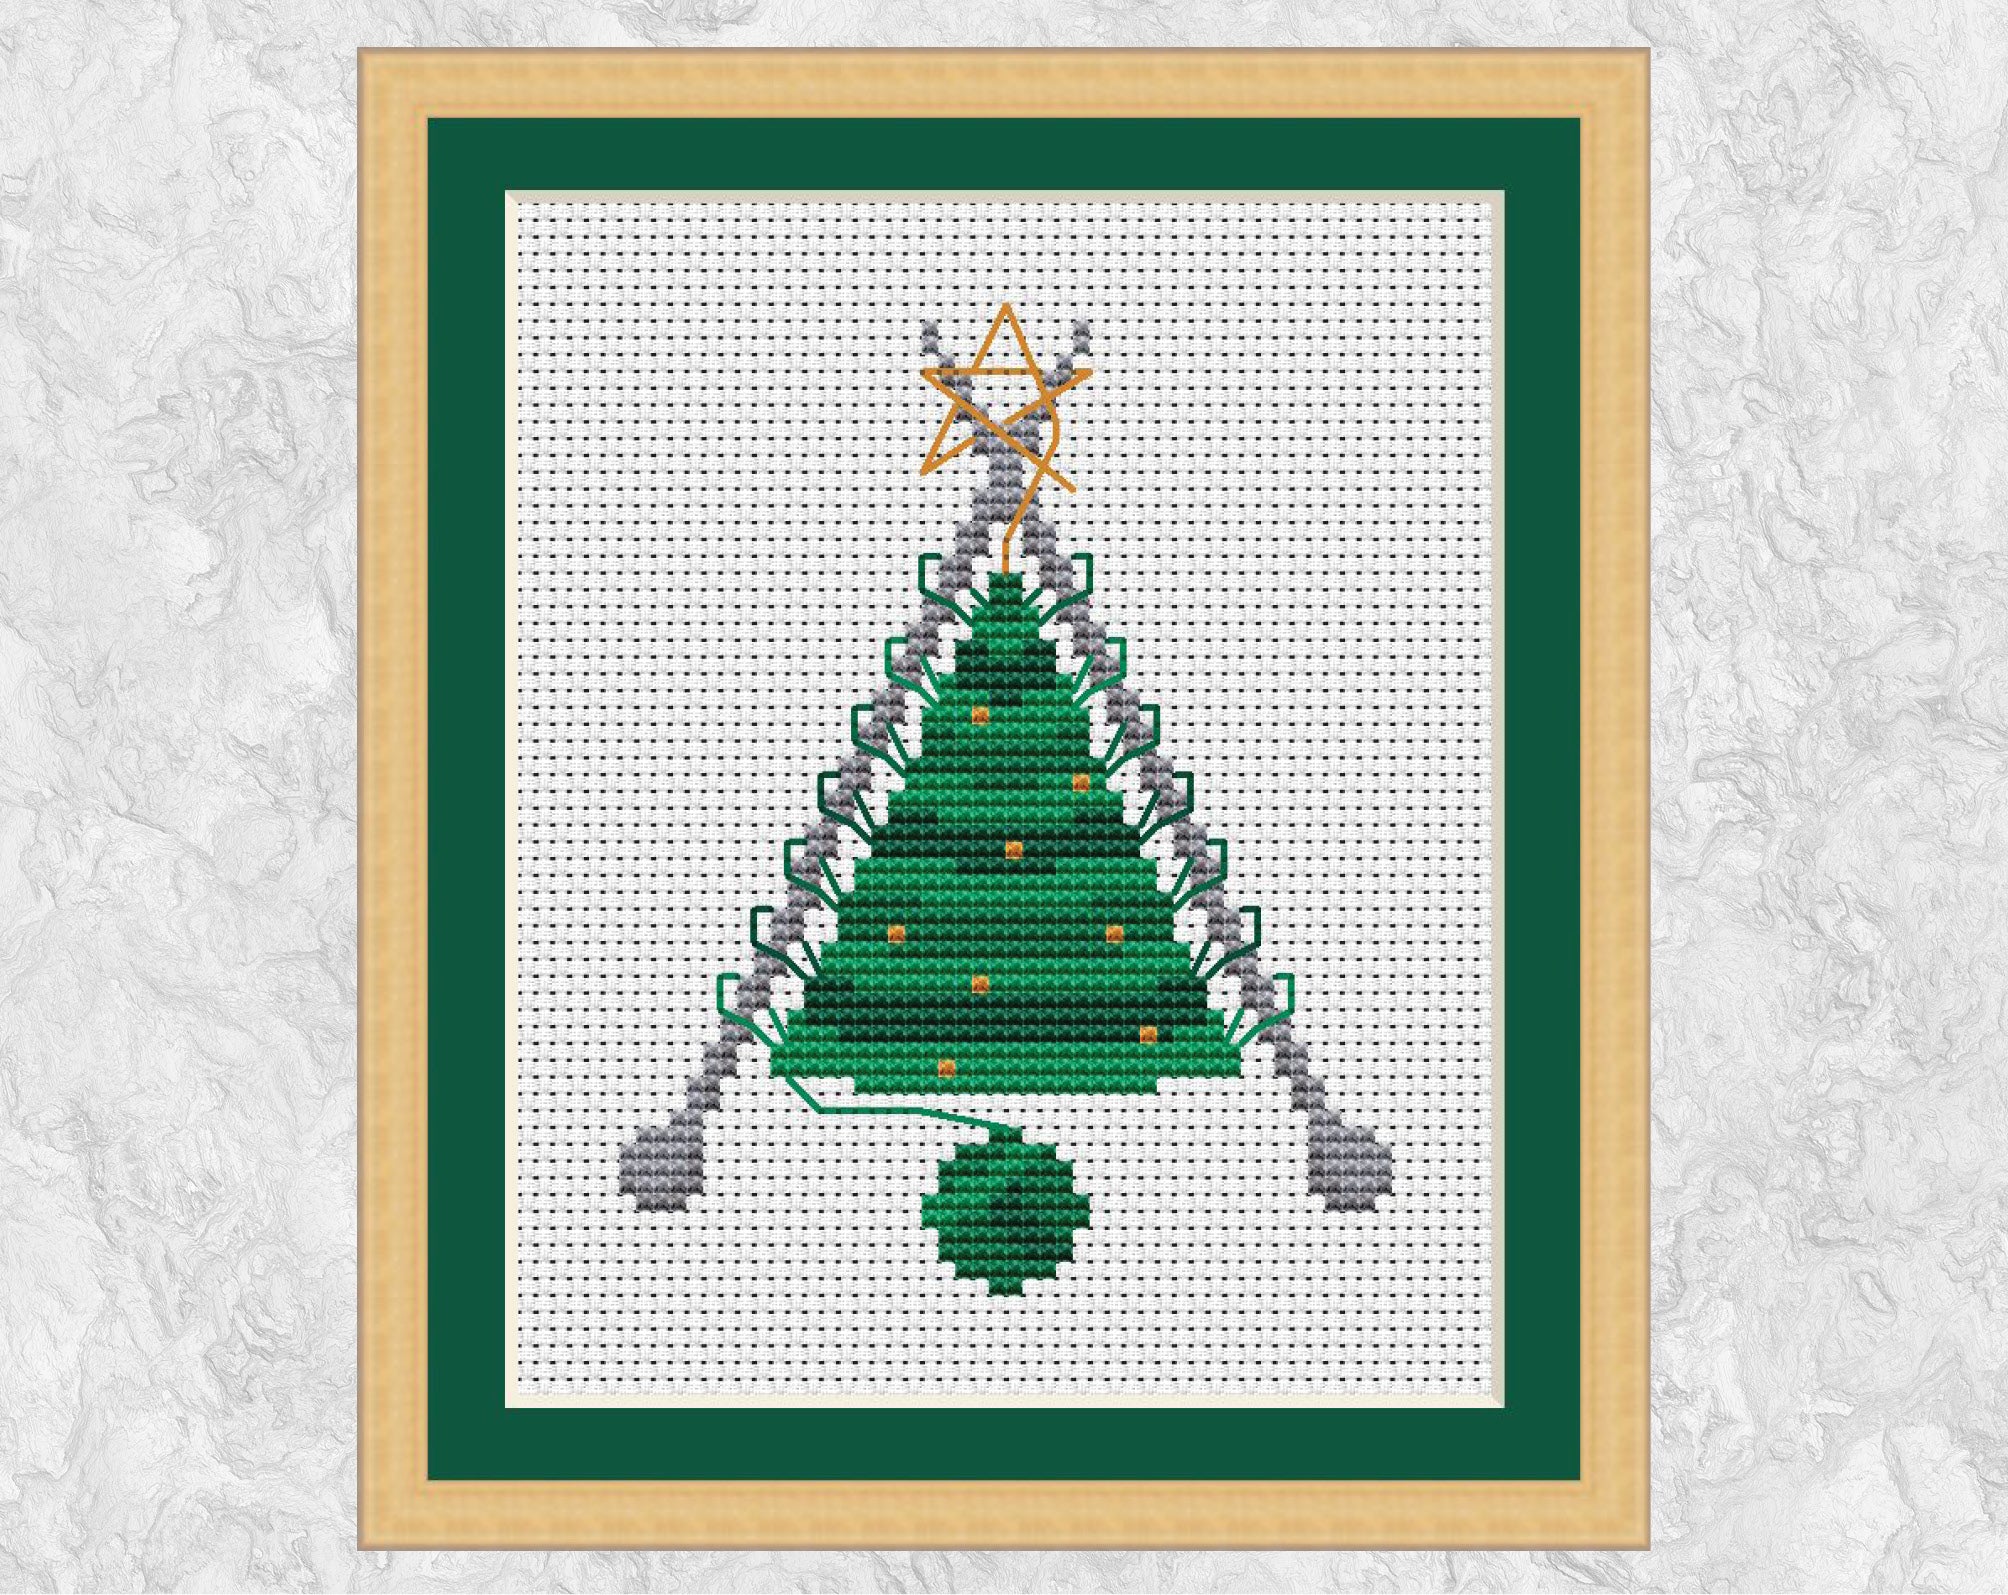 Knitted Christmas Tree cross stitch pattern. A knitted Christmas Tree shape still on the knitting needles, with a ball of yarn forming the pot. Shown with frame.